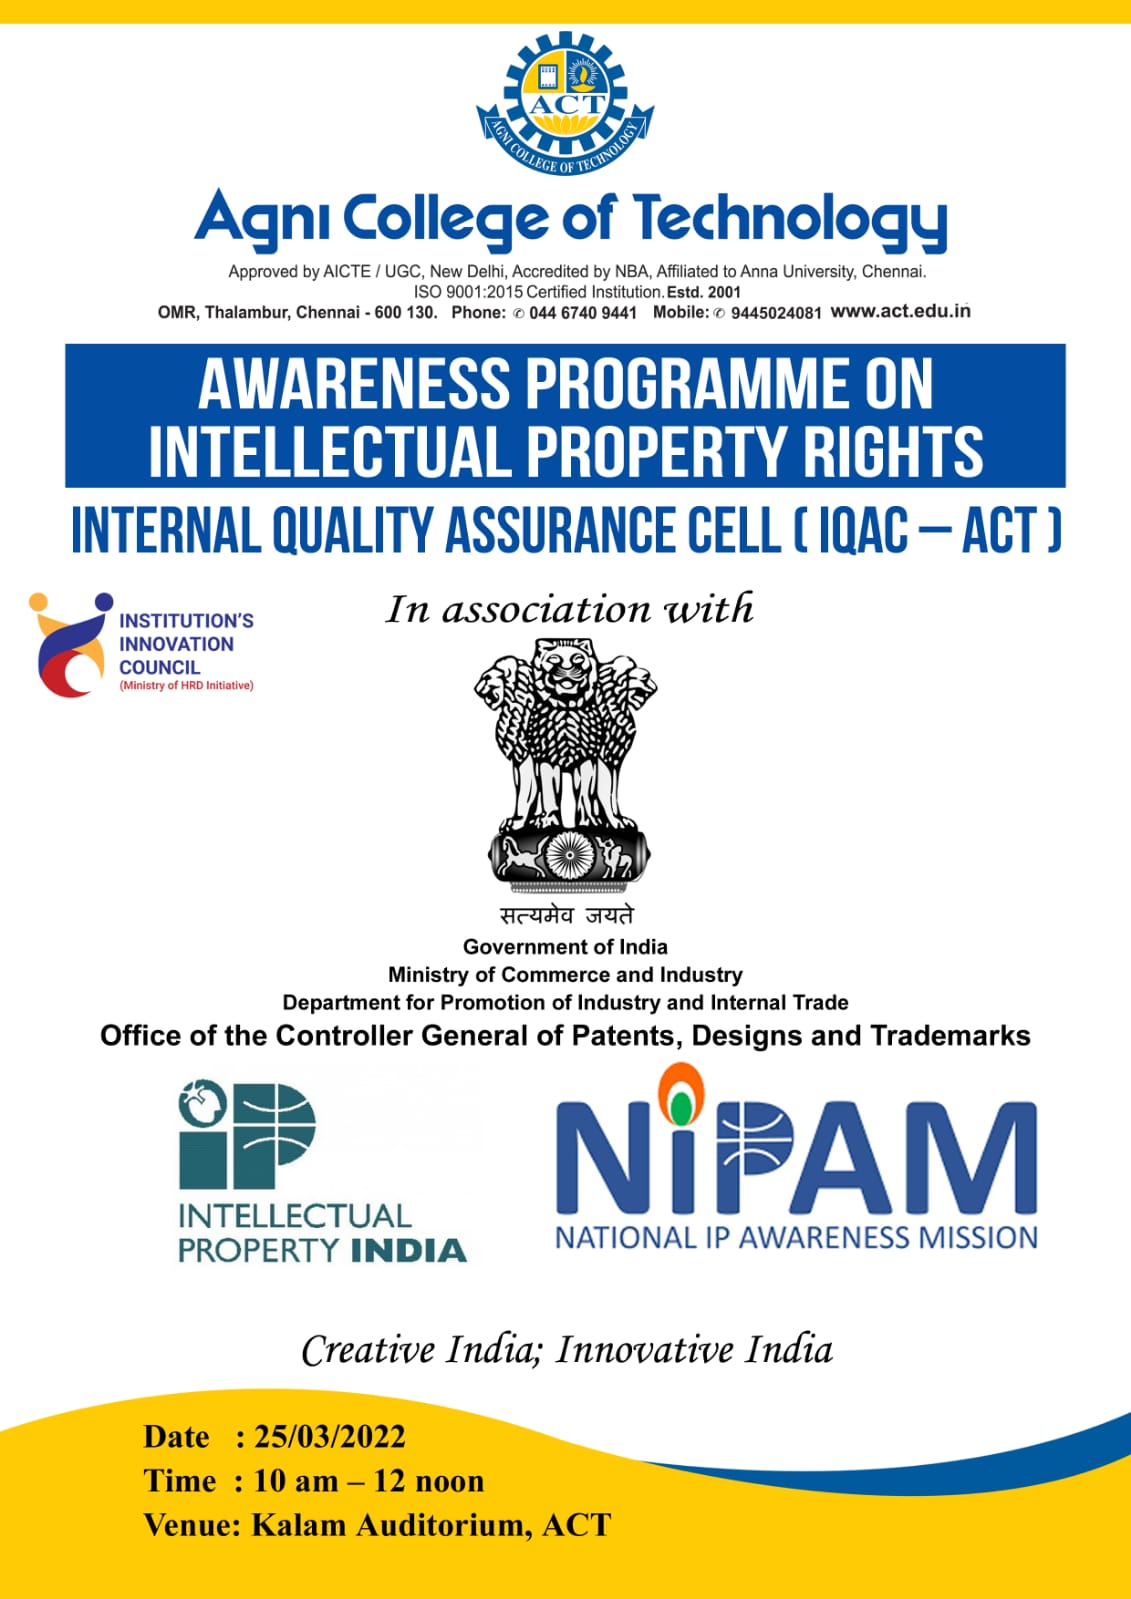 AWARENESS PROGRAMME ON INTELLECTUAL PROPERTY RIGHTS